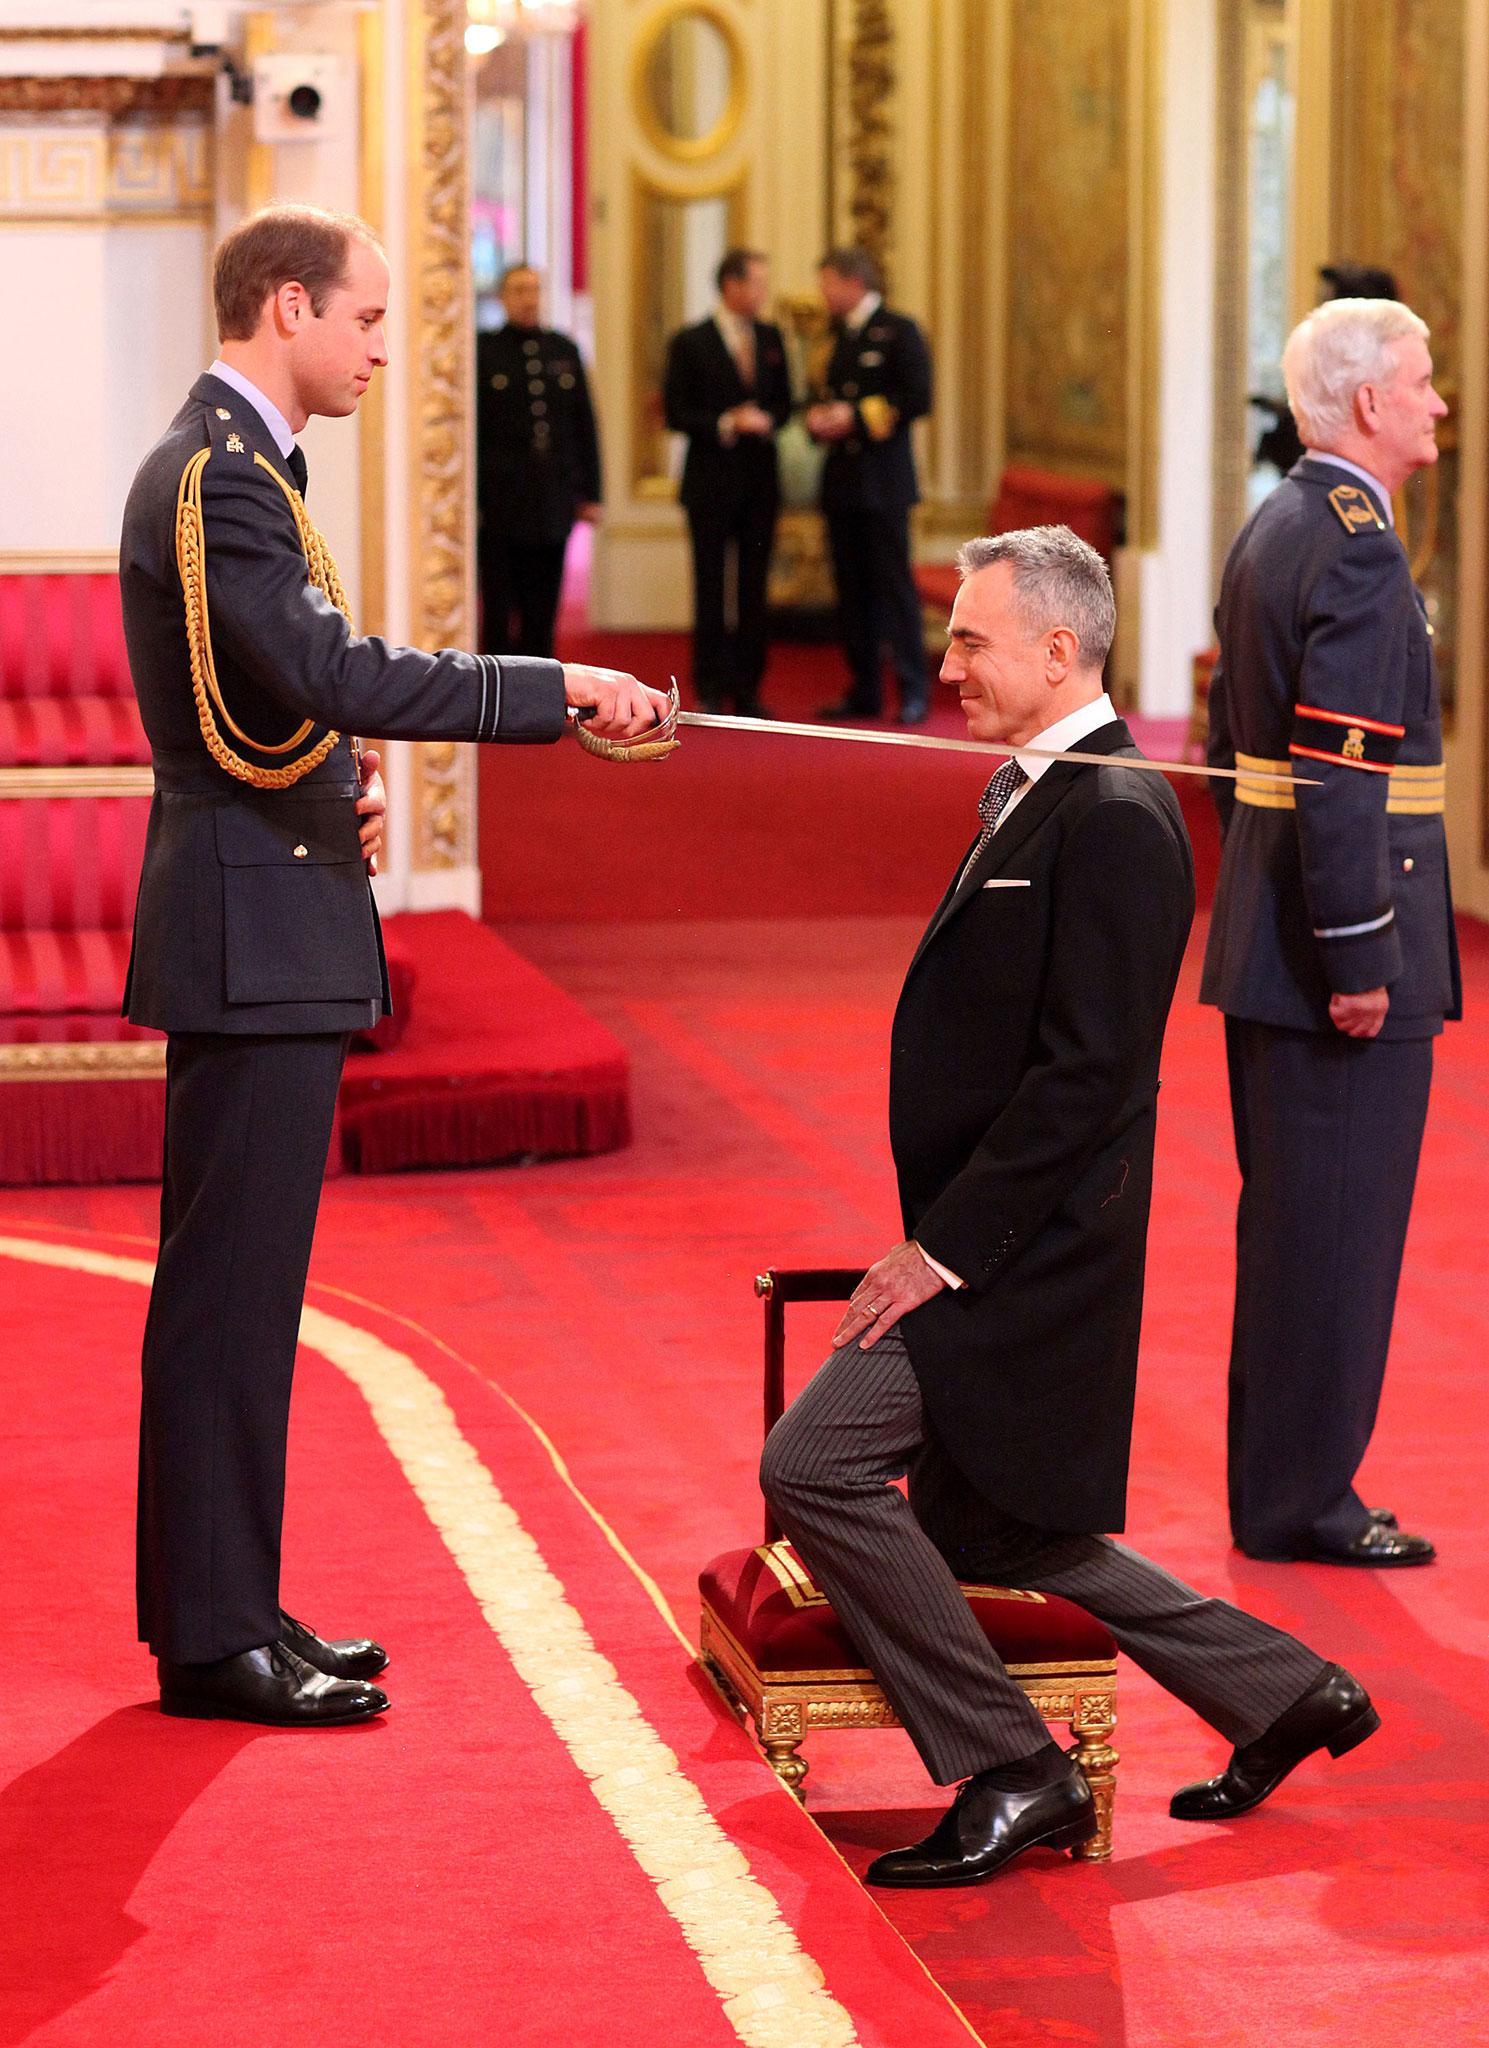 Daniel Day-Lewis is knighted by the Duke of Cambridge at Buckingham Palace